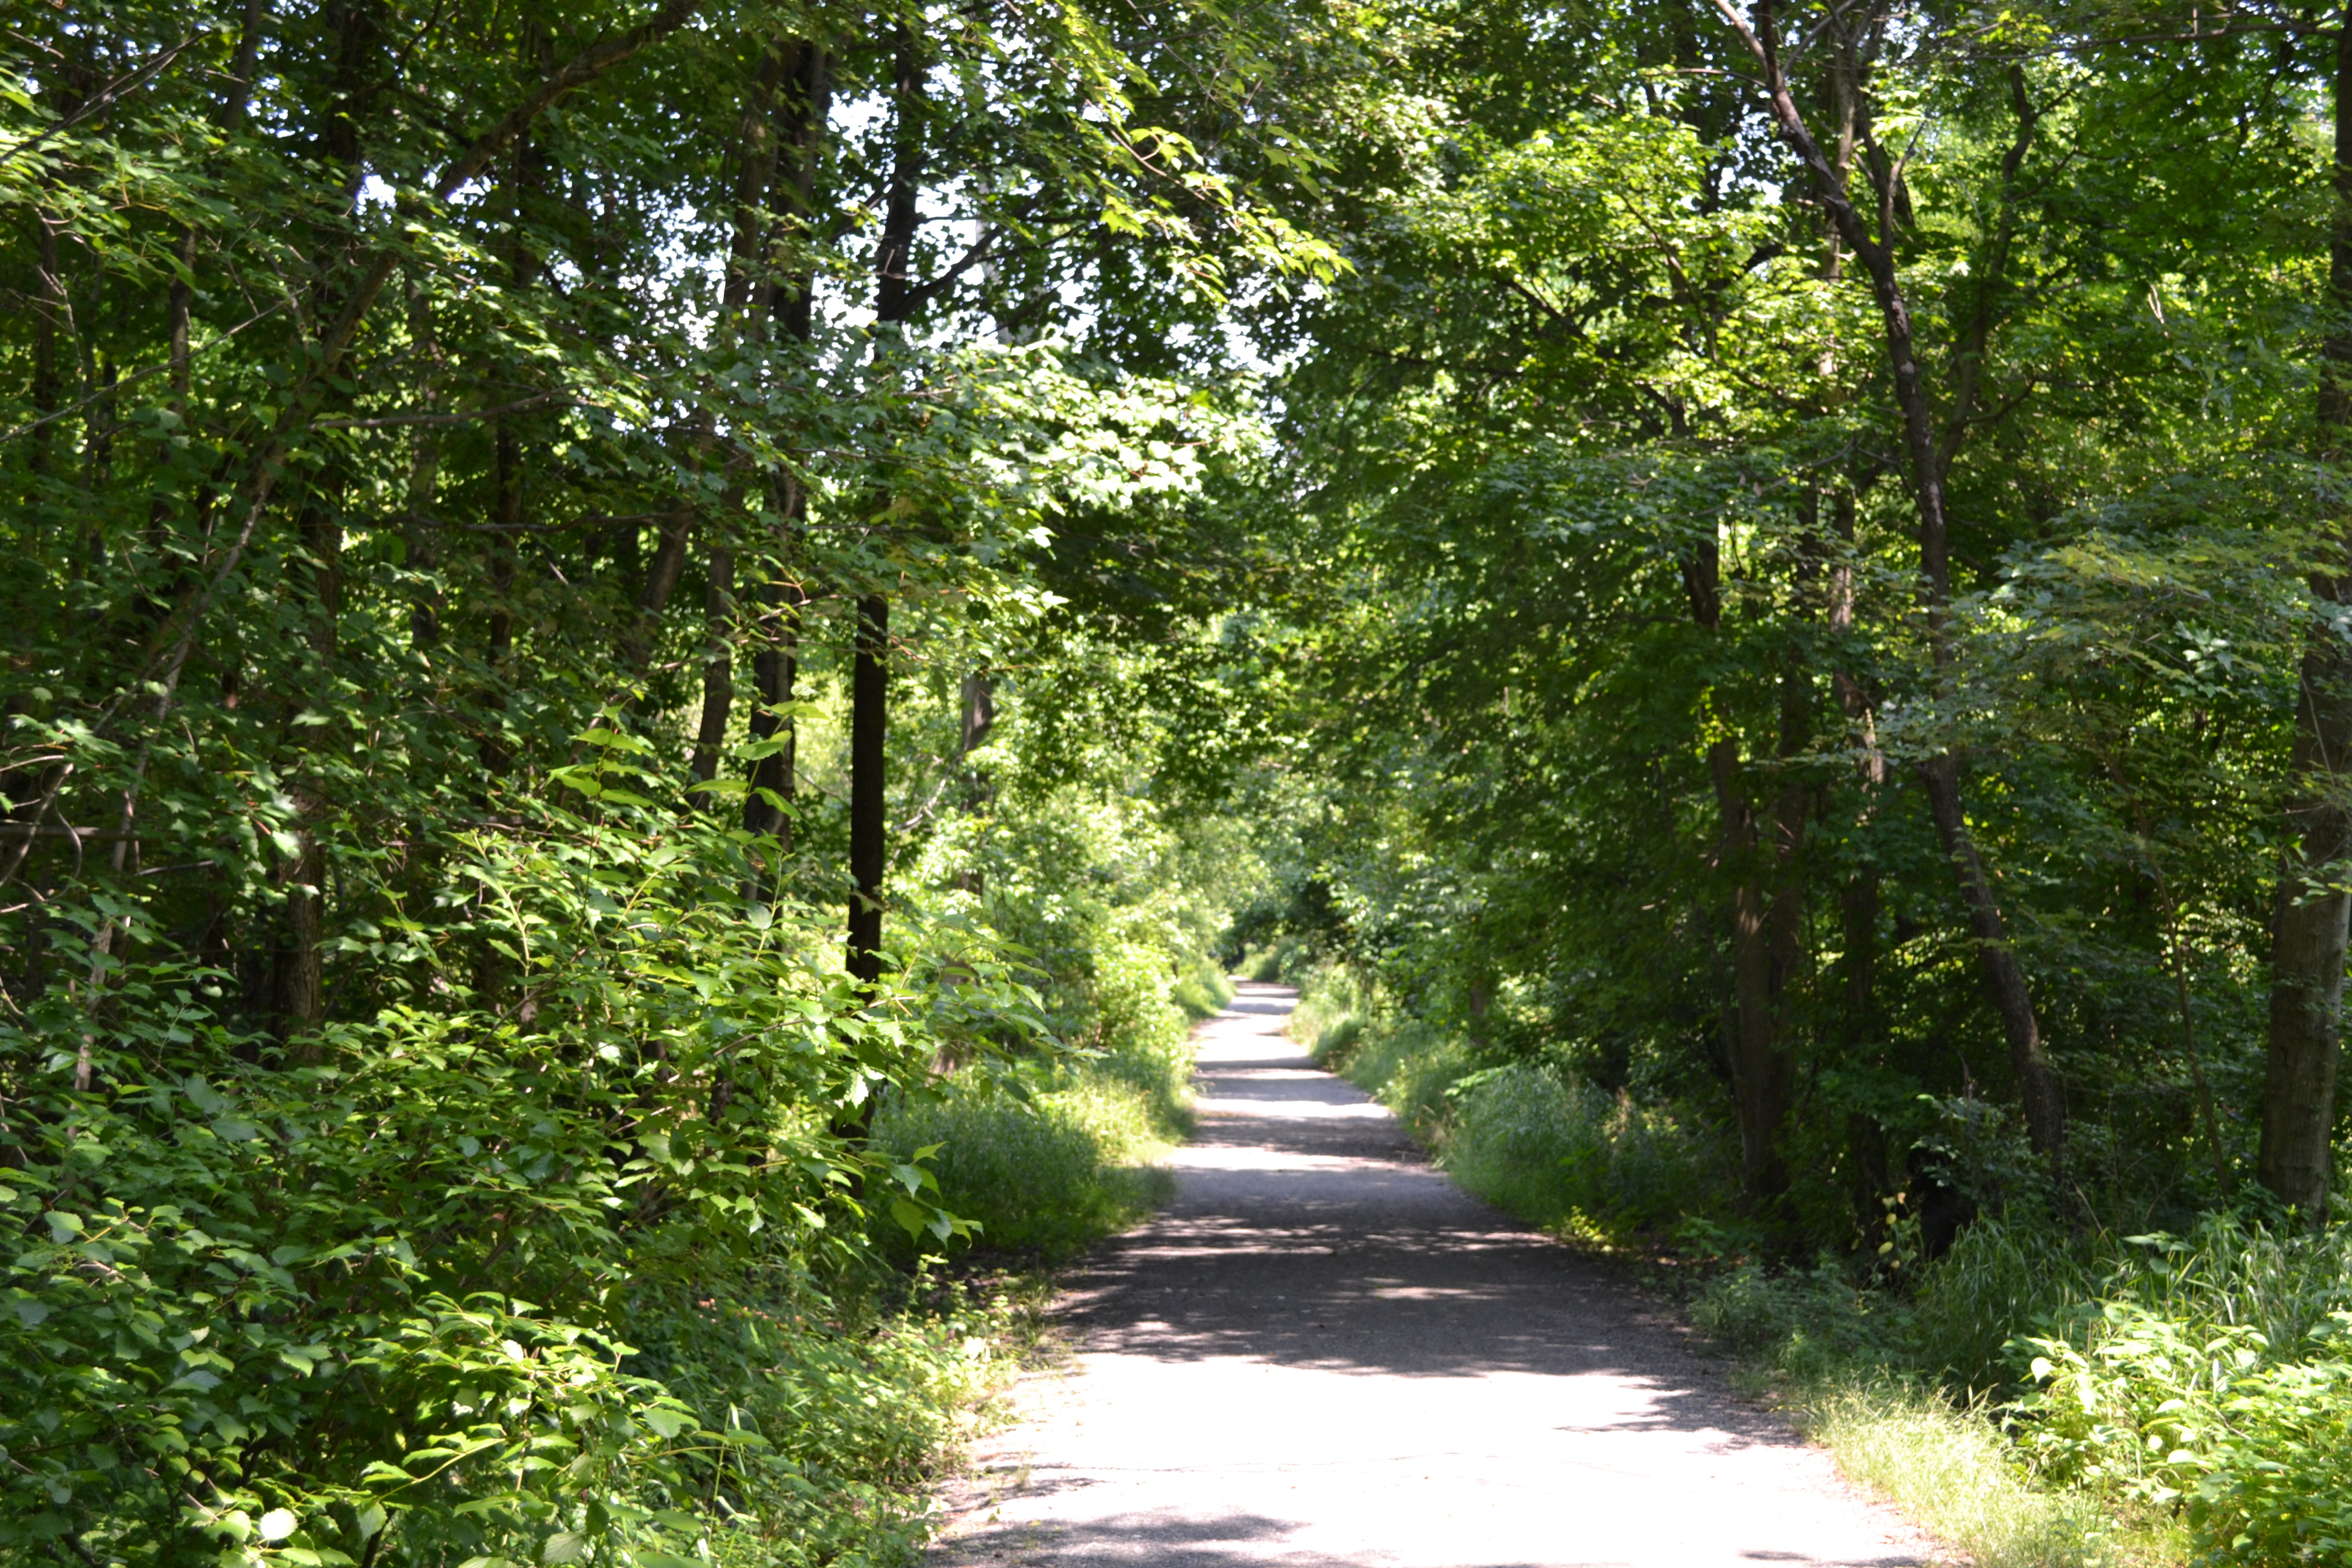 In total there are more than 10 miles of hiking trails, many of which are open to cyclists